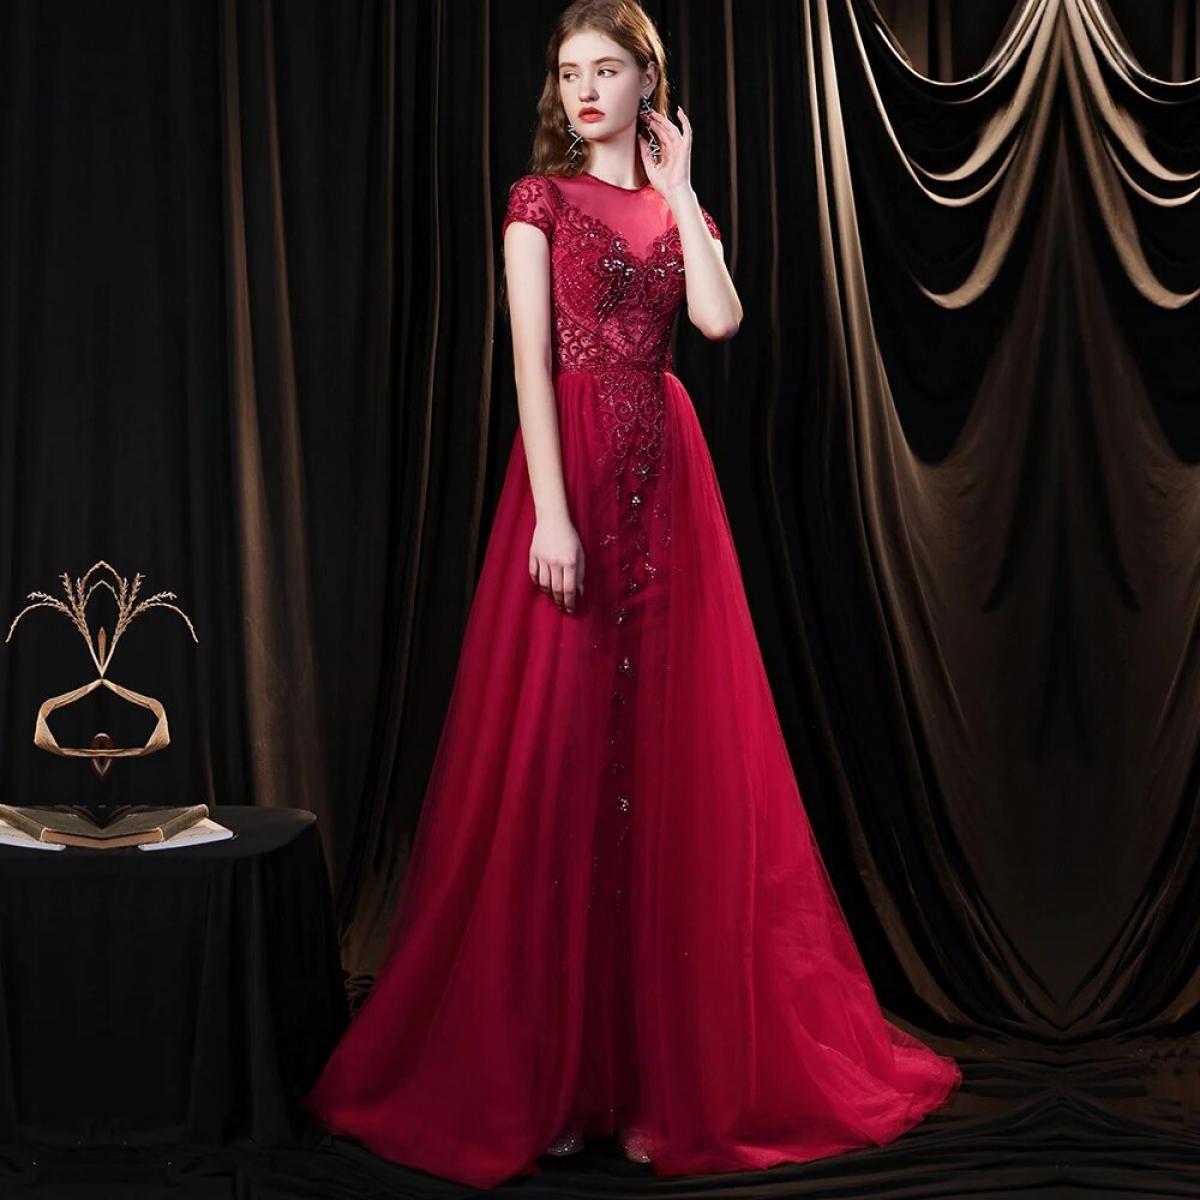 Luxury Red Evening Dress Dubai Sparkly Rhinestone Cap Sleeve Formal Gown Competition Dresses Robe De Soiree  Evening Dre